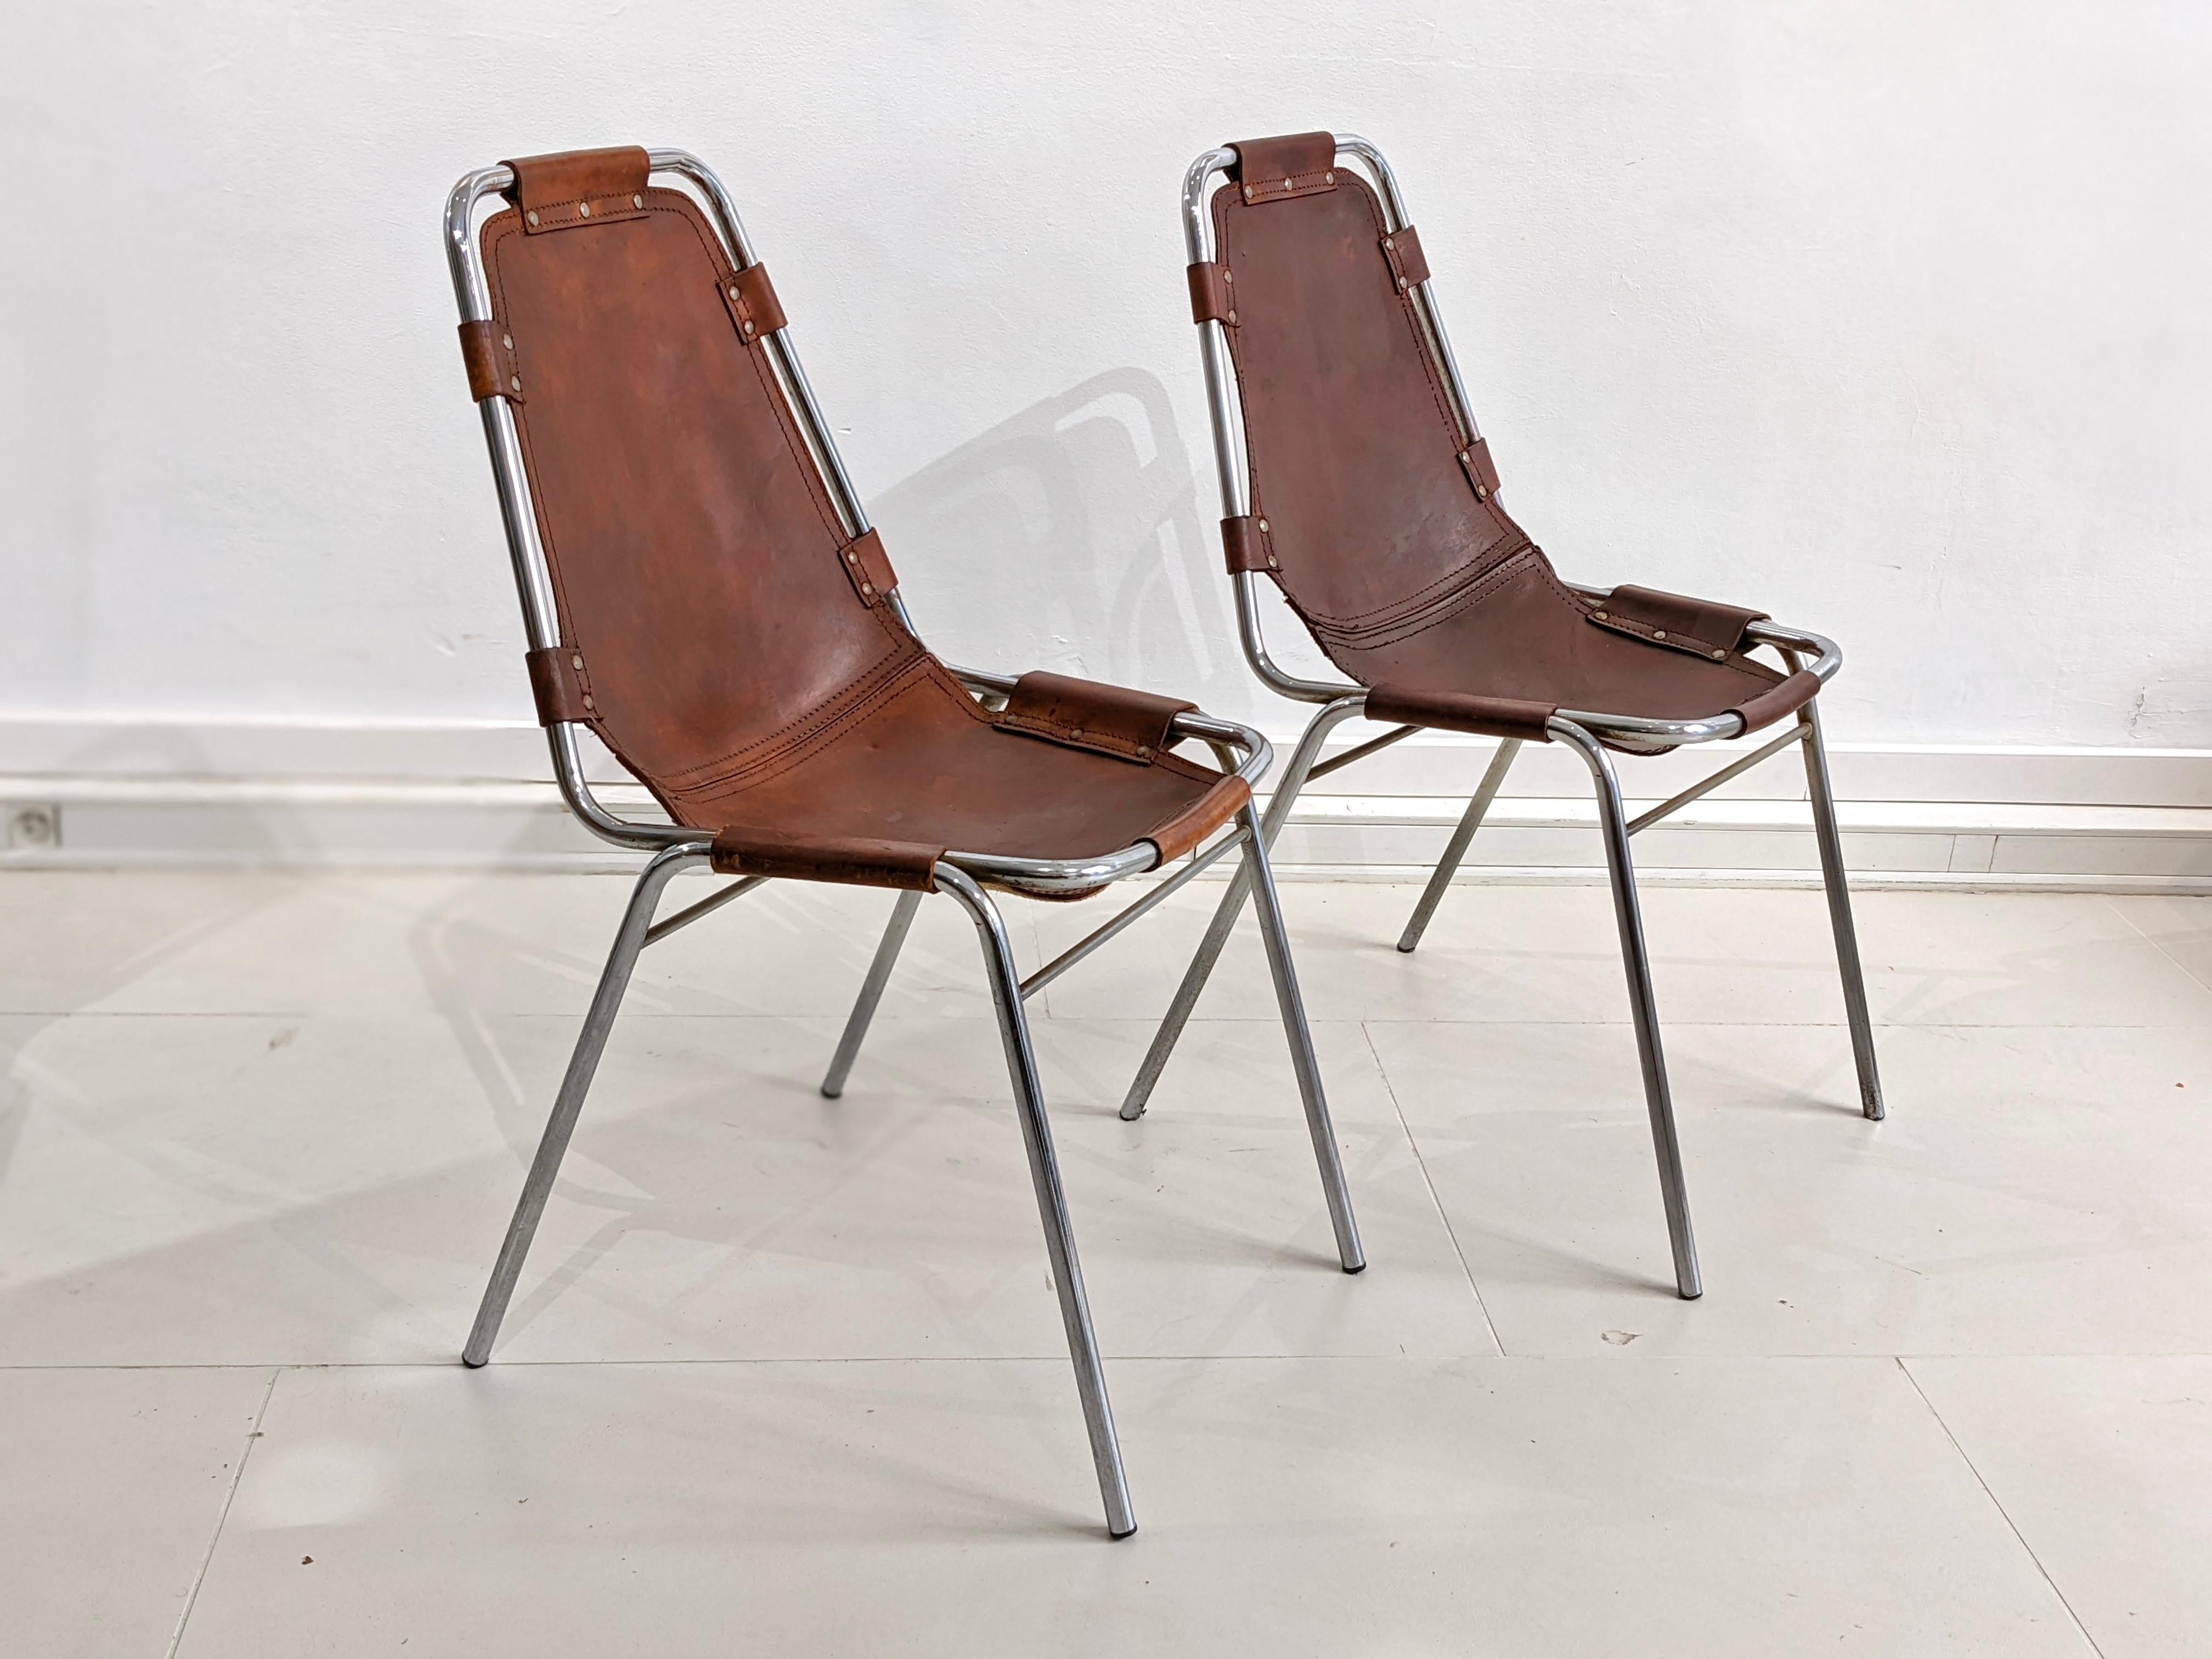 Set of 4 chairs by Charlotte Perriand for Les Arcs in cow skin leather. Good condition. Circa 1970

2 chairs have been reshaped at the level of the seat which explains the different colours of the leather (see photos). Traces of wear and